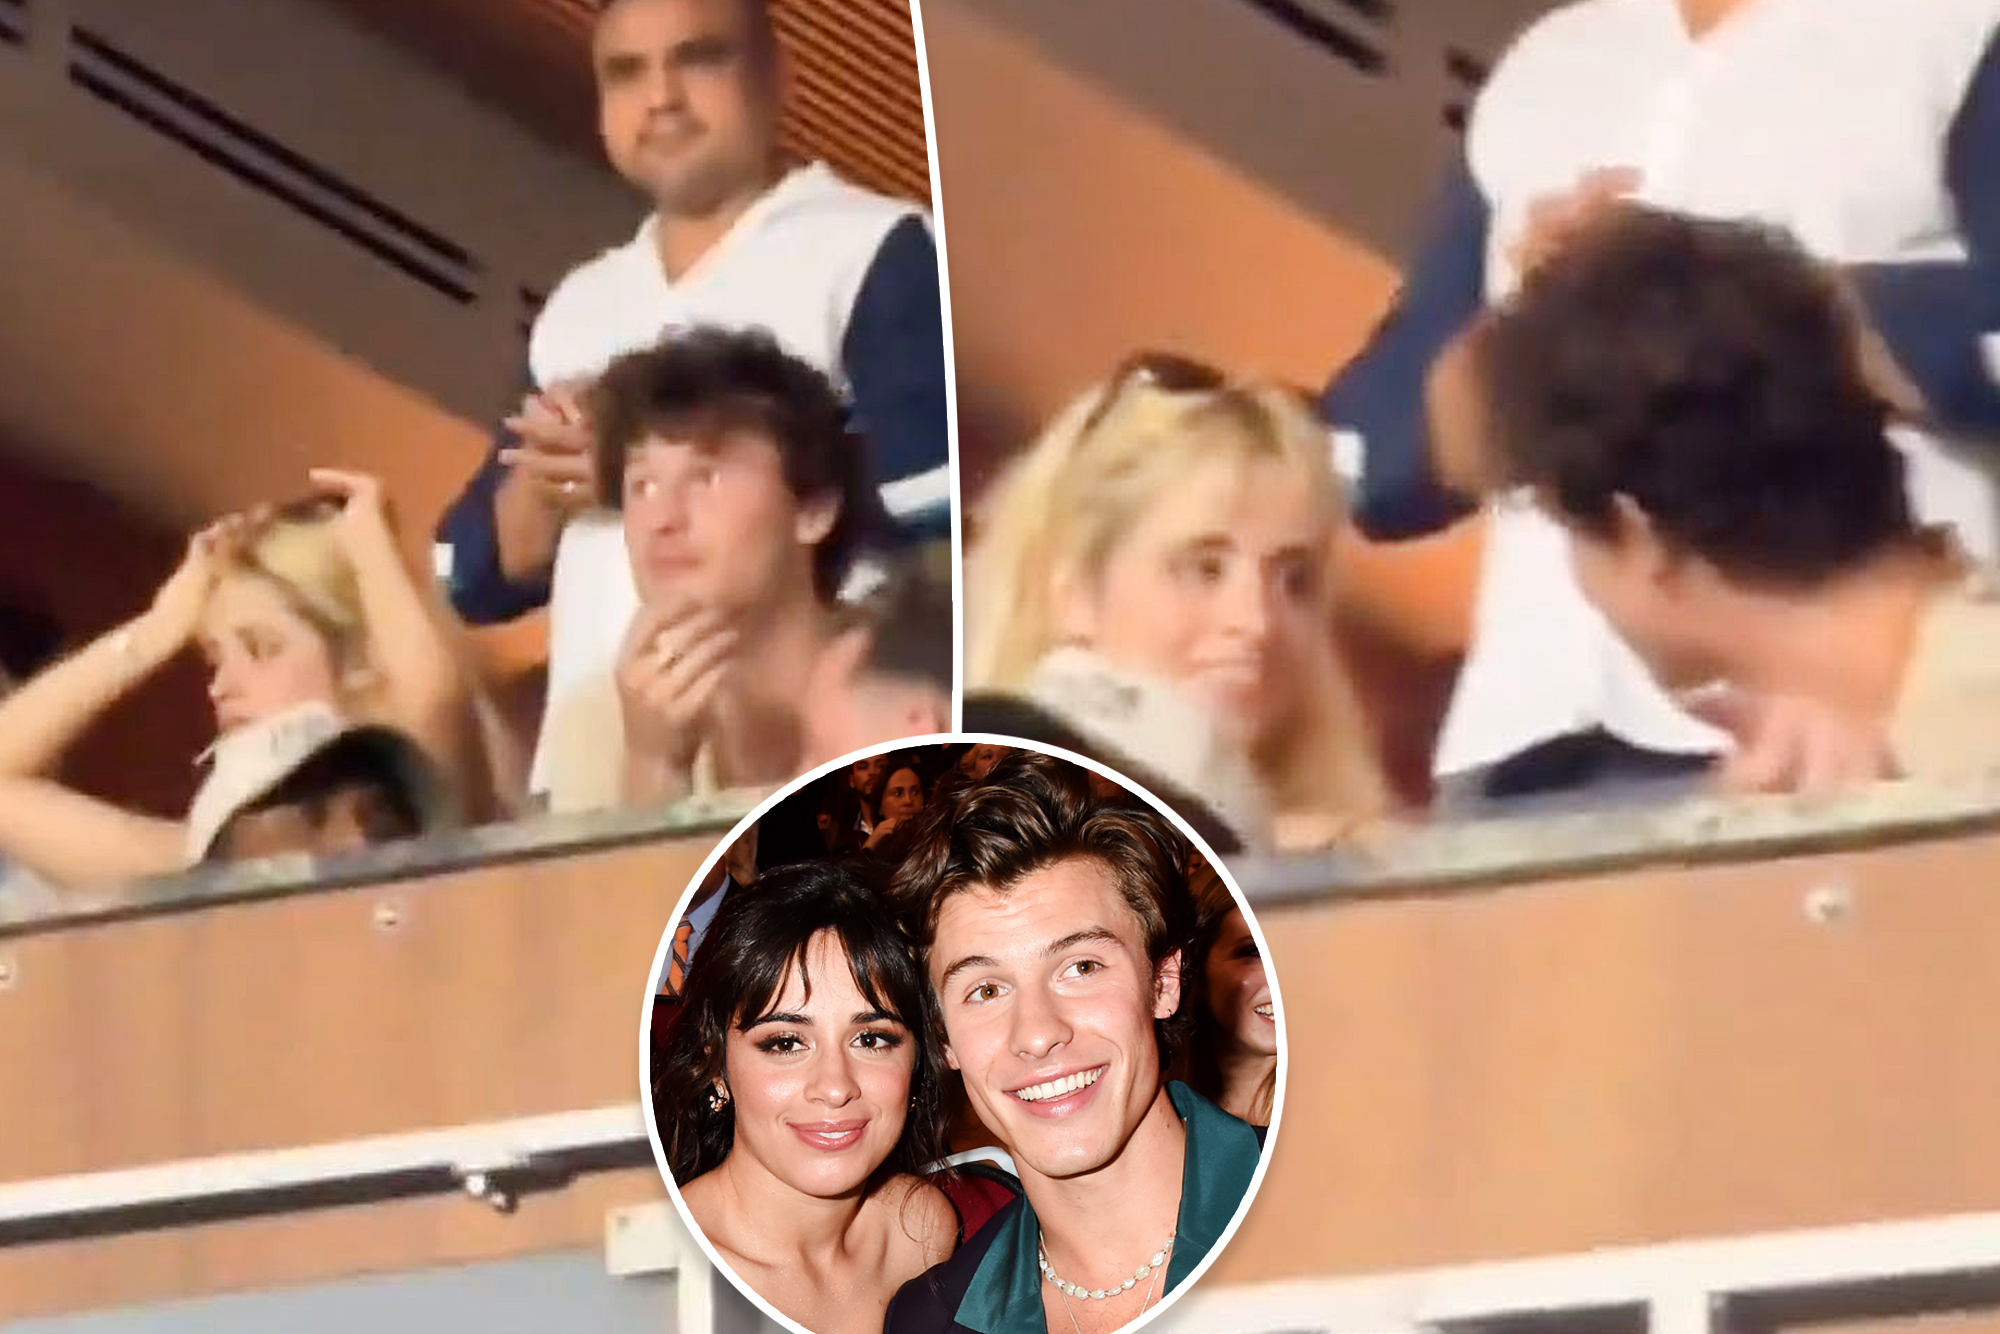 Shawn Mendes and Camila Cabello: Are They Rekindling Their Romance?